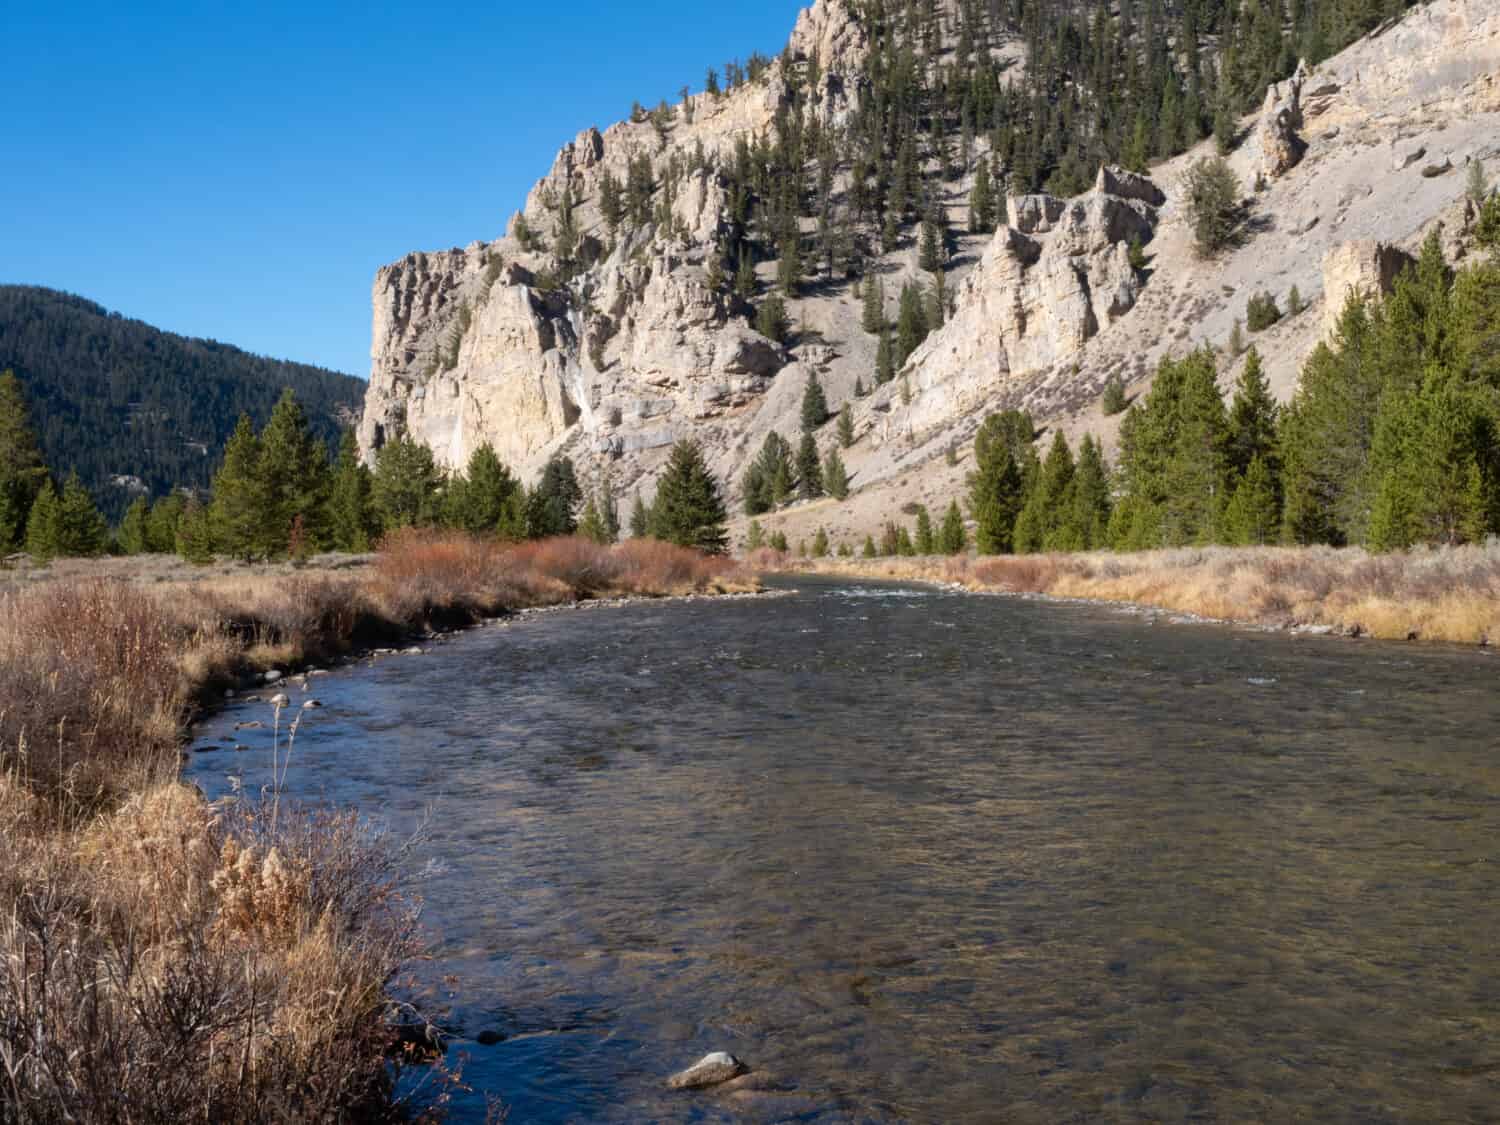 The Gallatin River flowing in Yellowstone National Park past stone cliffs and autumn vegetation.